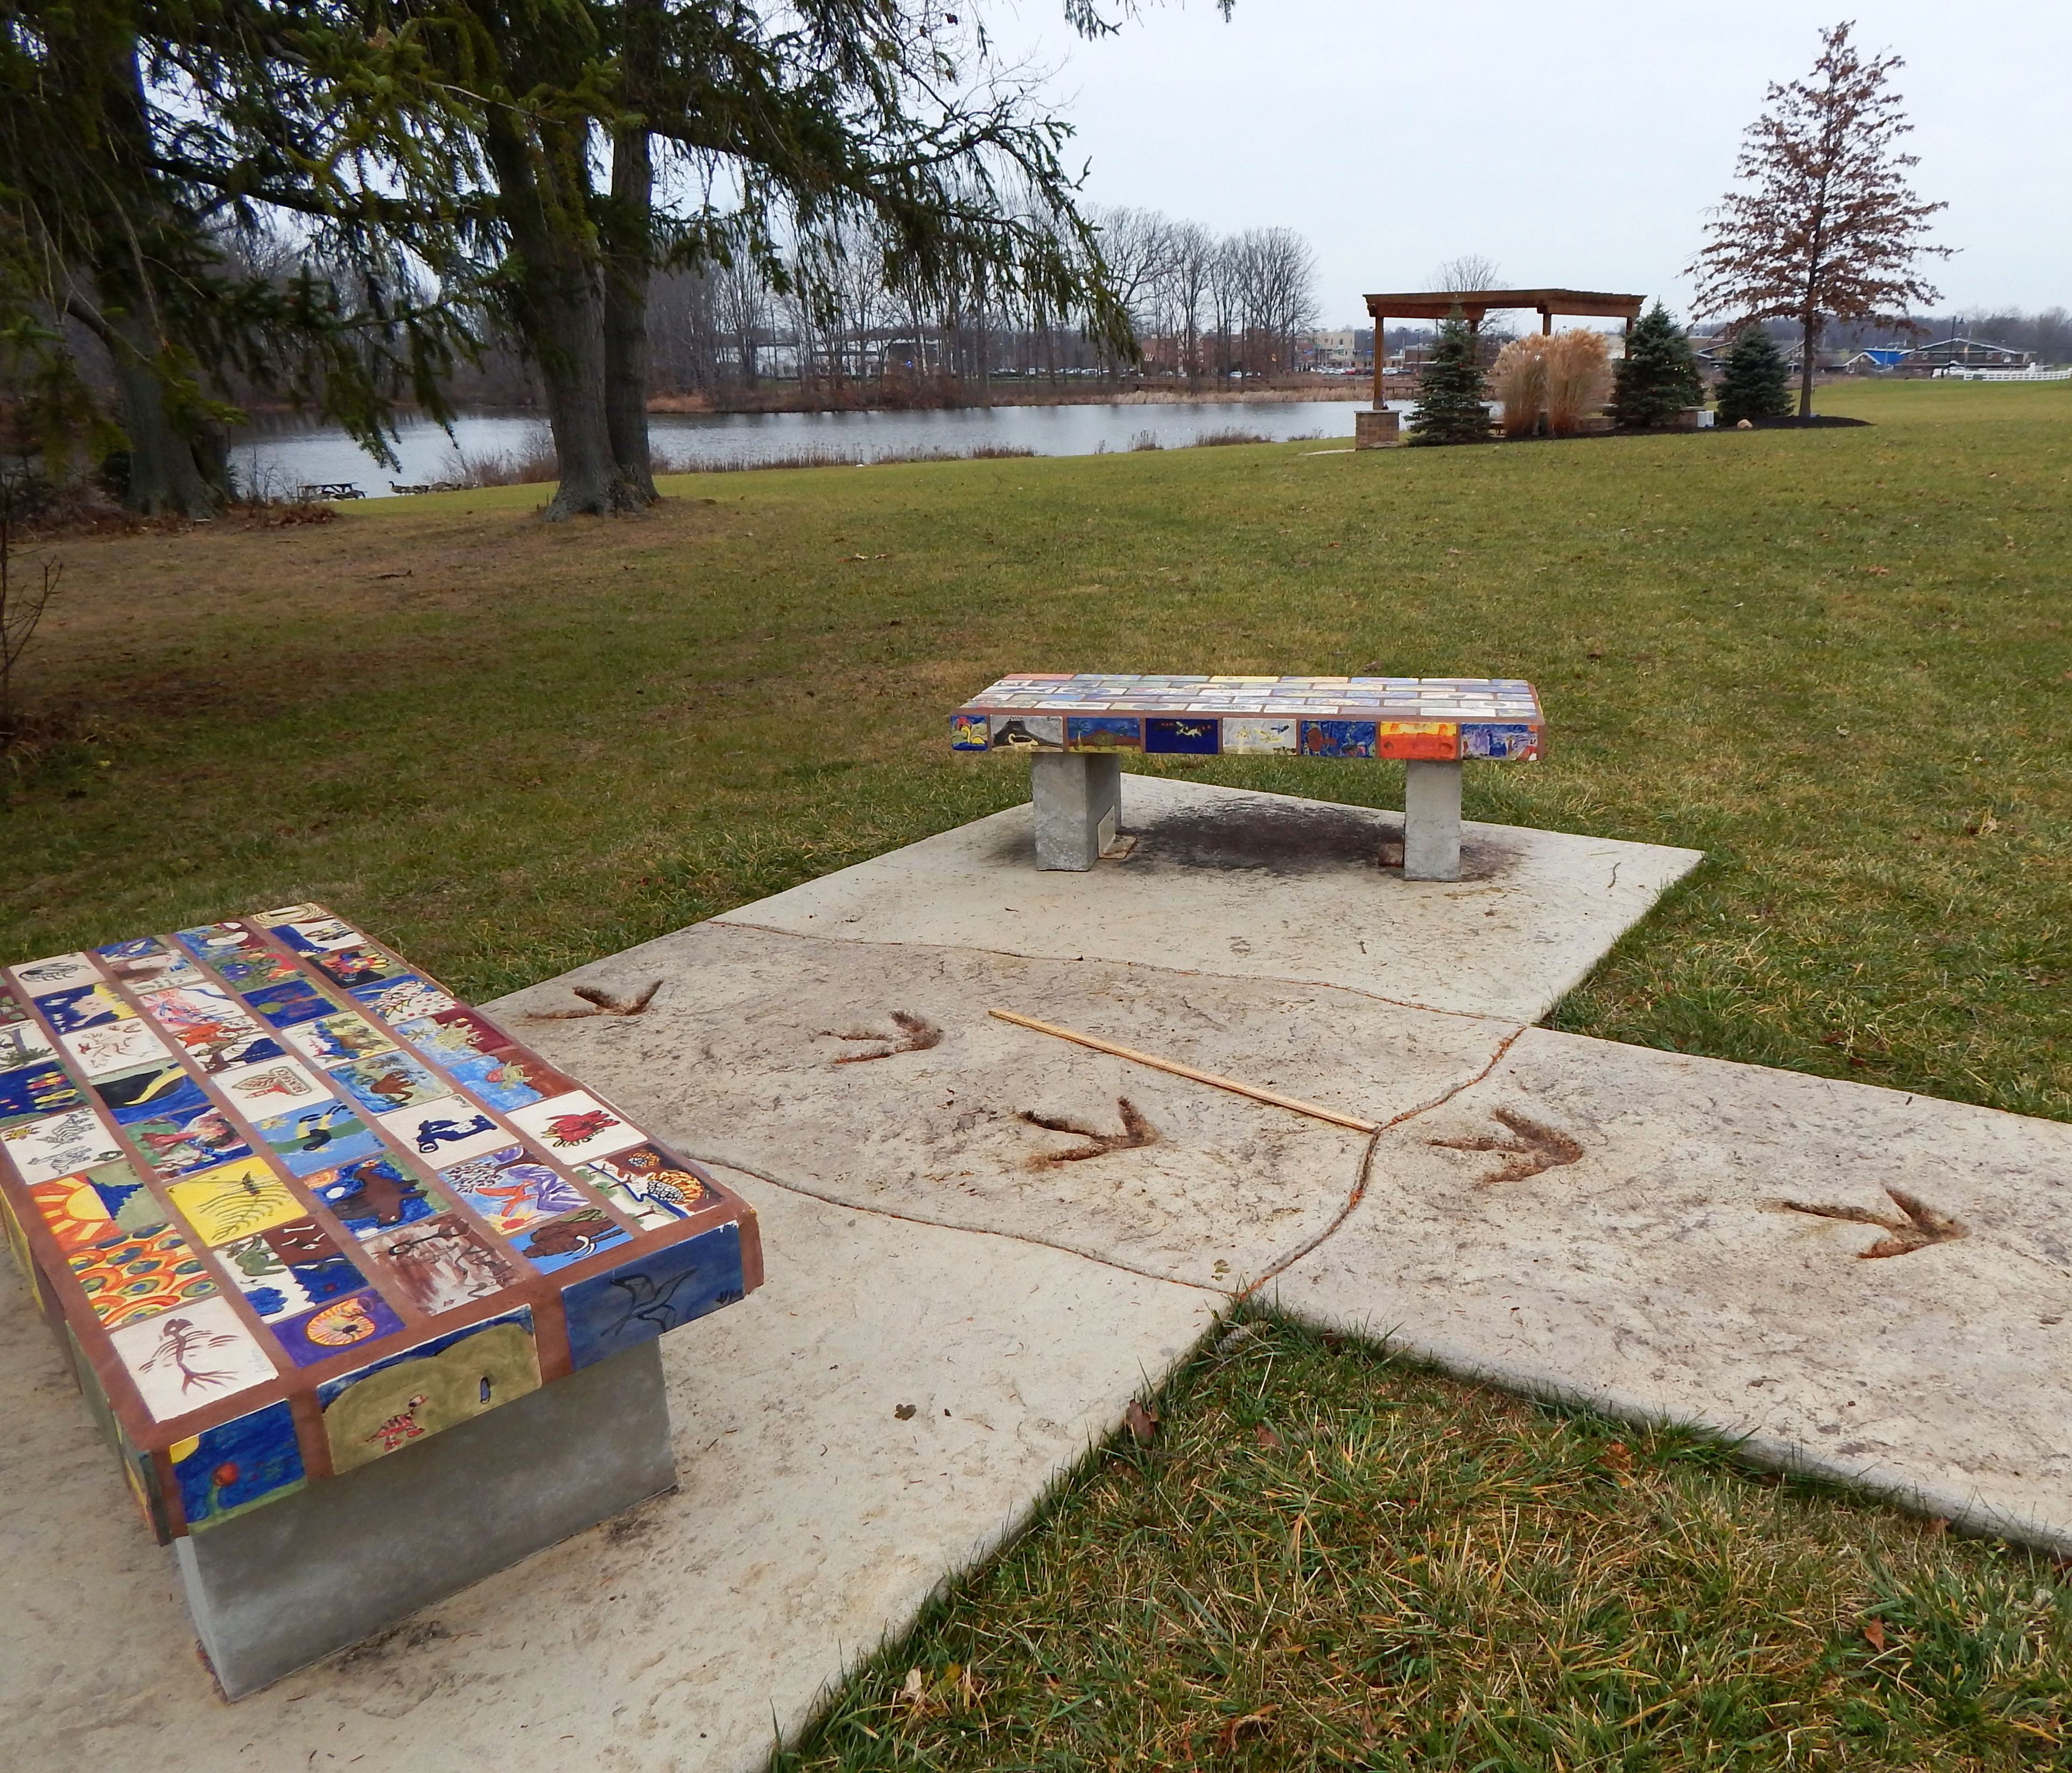 Benches and lake view